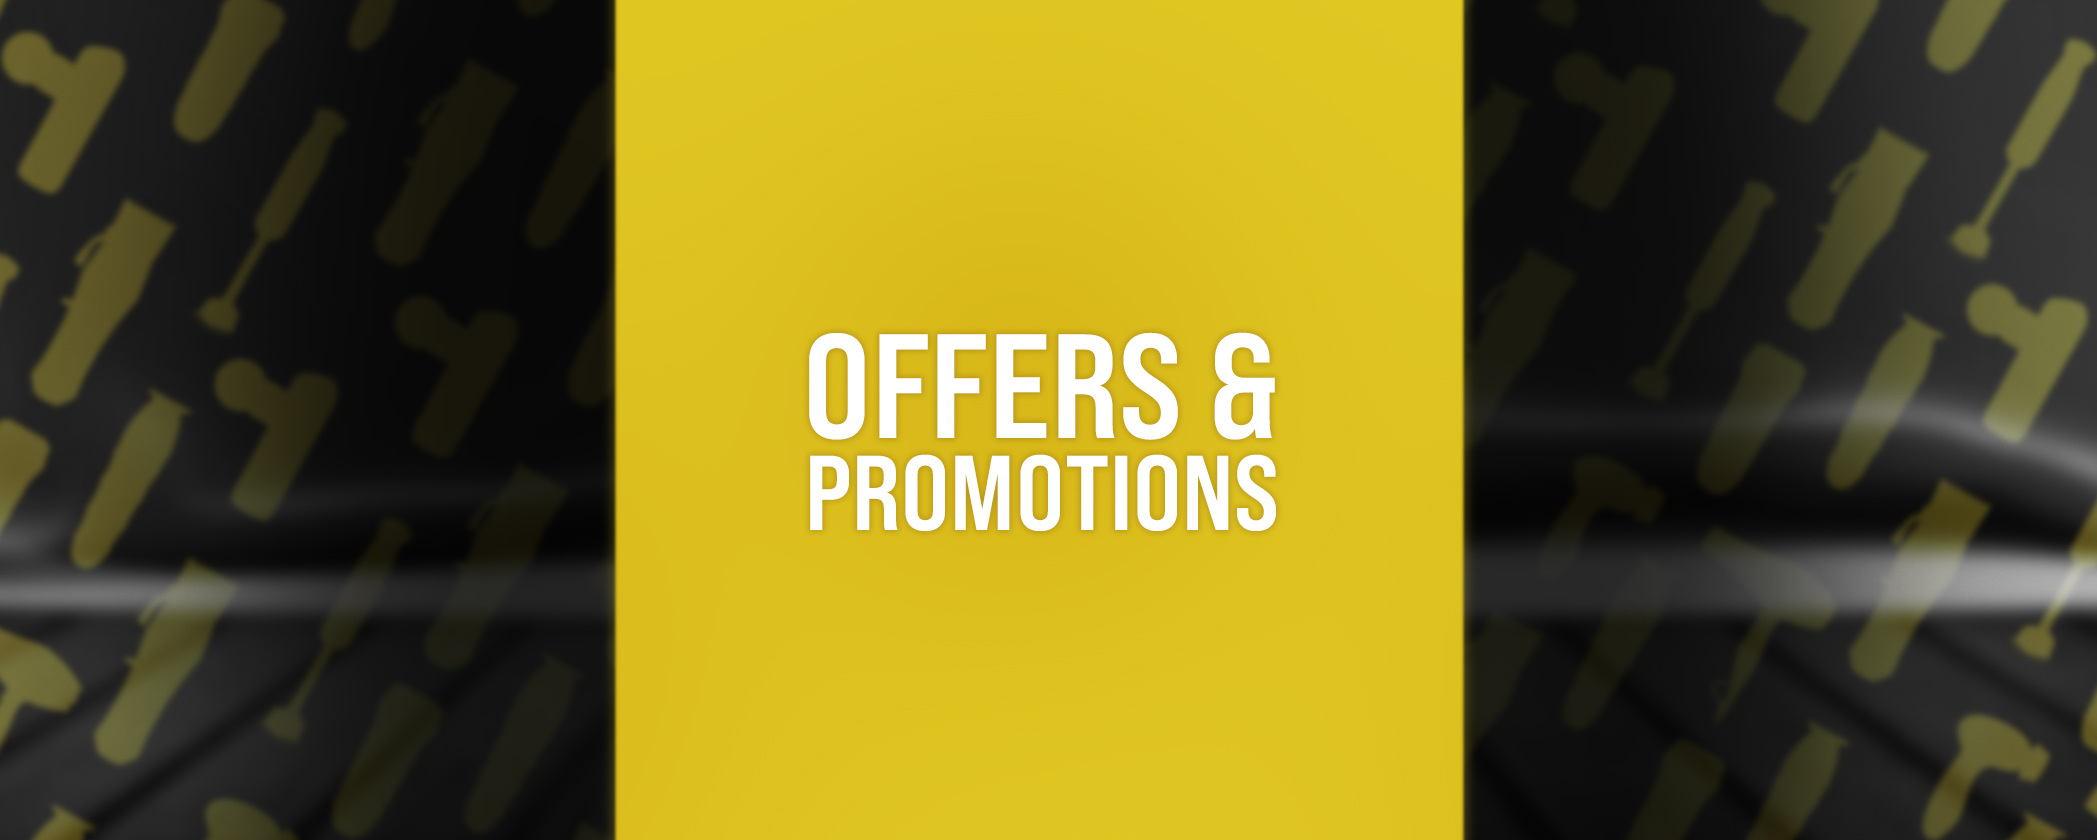 Wahl Offers & Promotions